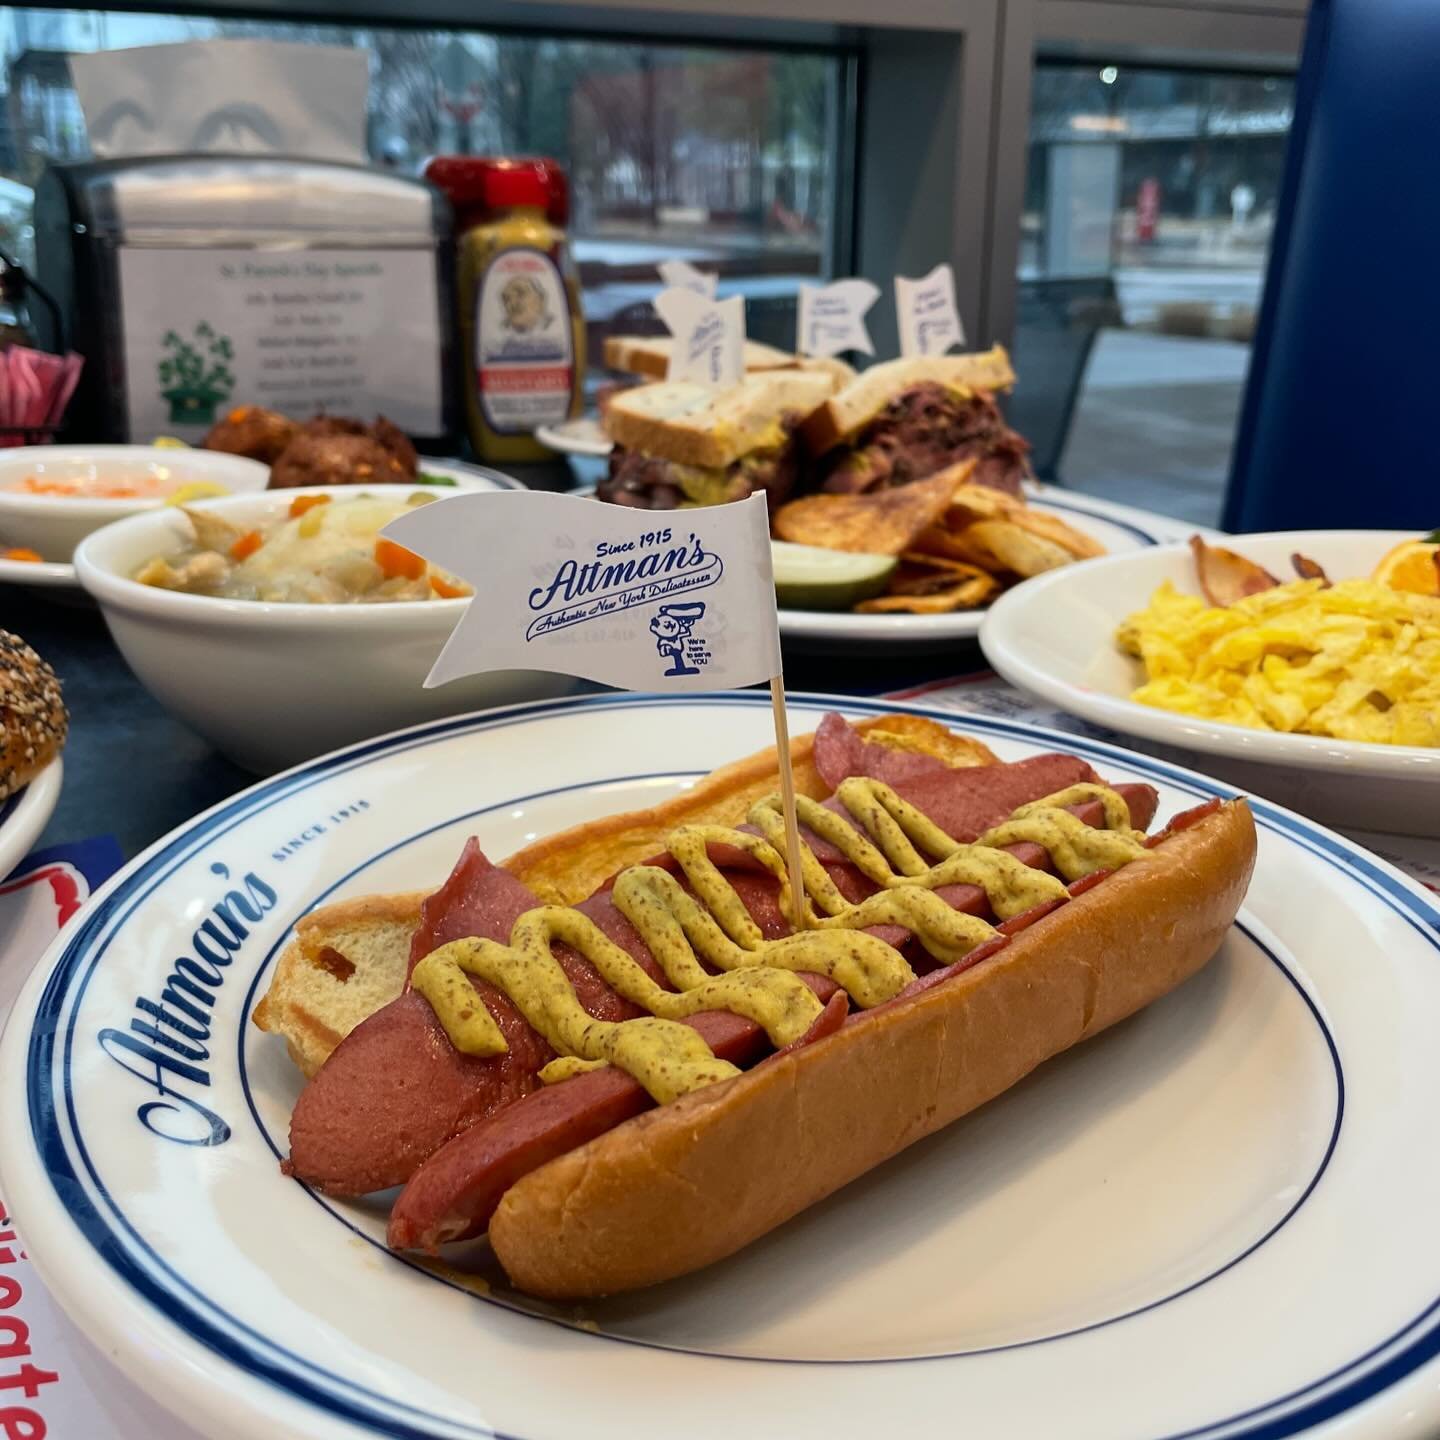 Any time is @attmansharborpoint time! Stop in for breakfast, lunch, dinner, and happy hour every day of the week. 

With endless options to choose from you and your crew are sure to find something you love.

#attmansdelicatessen #baltimore #deli #bre